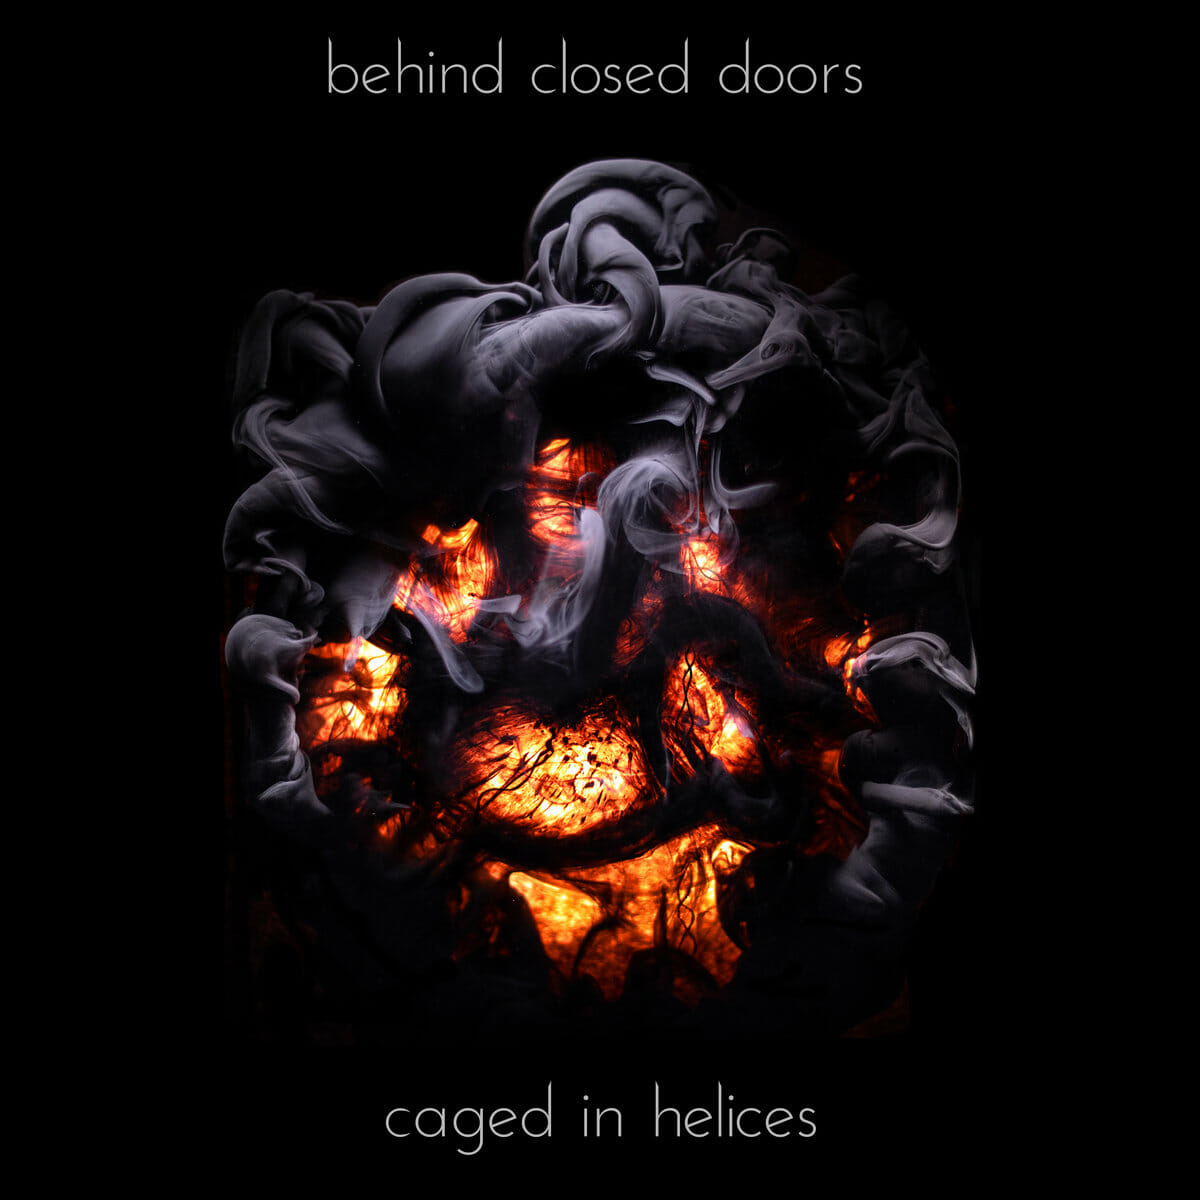 BehindClosedDoors_CagedInHelices